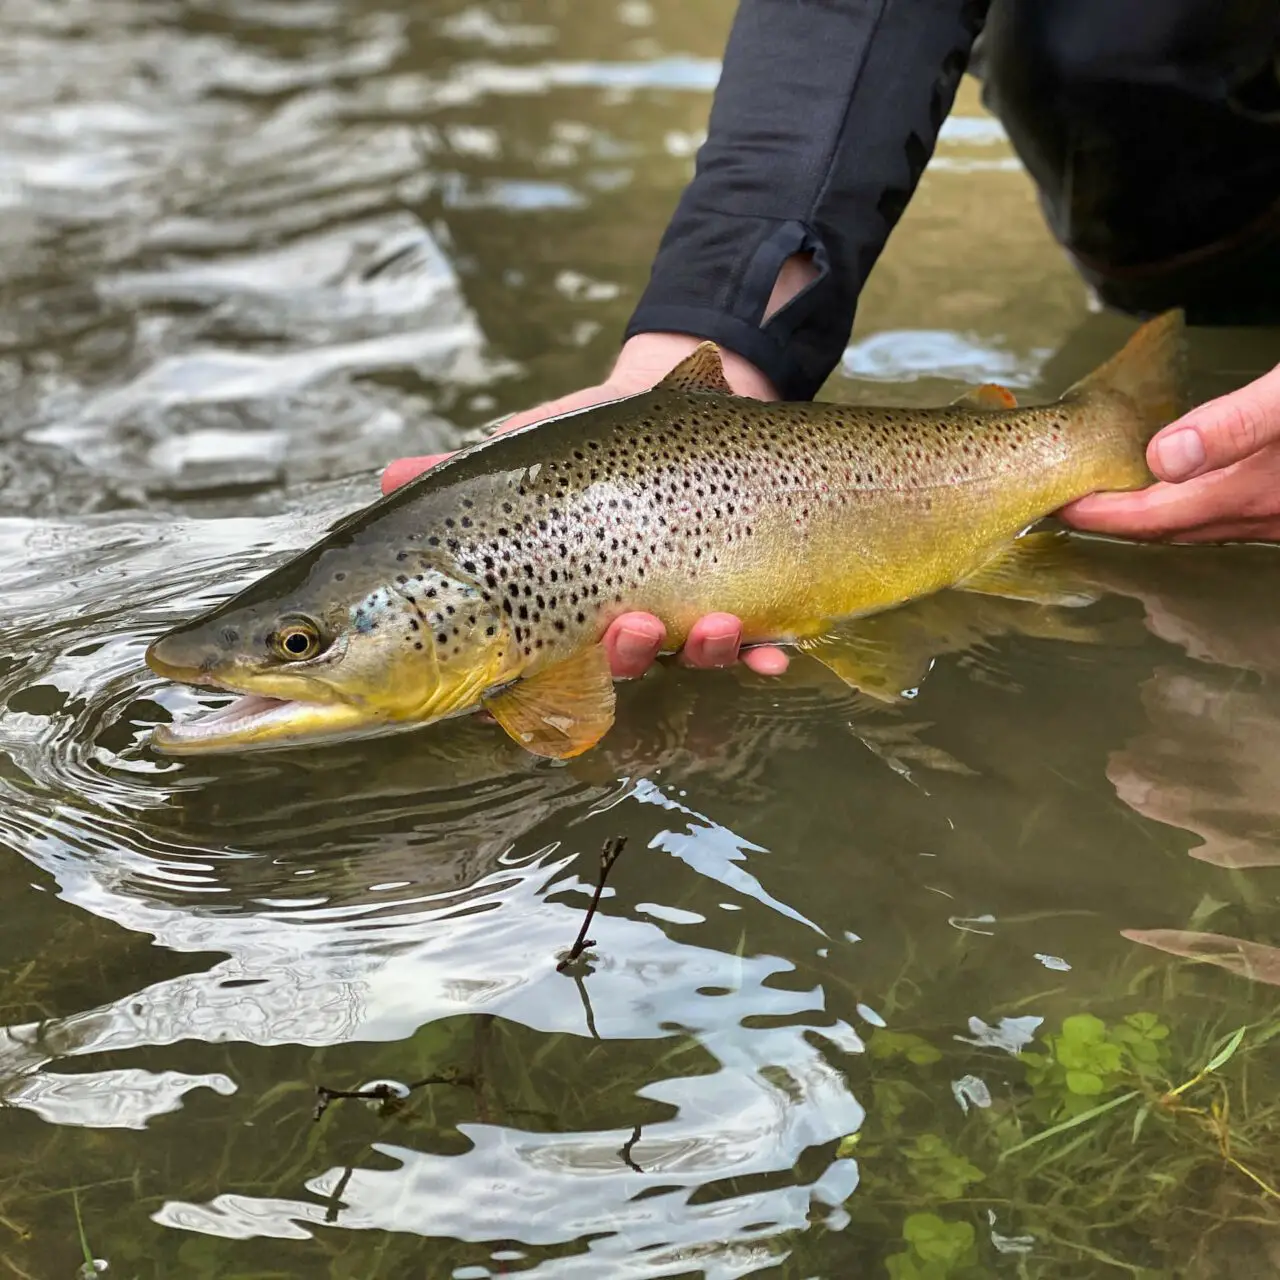 Brown Trout in hands of fisherman